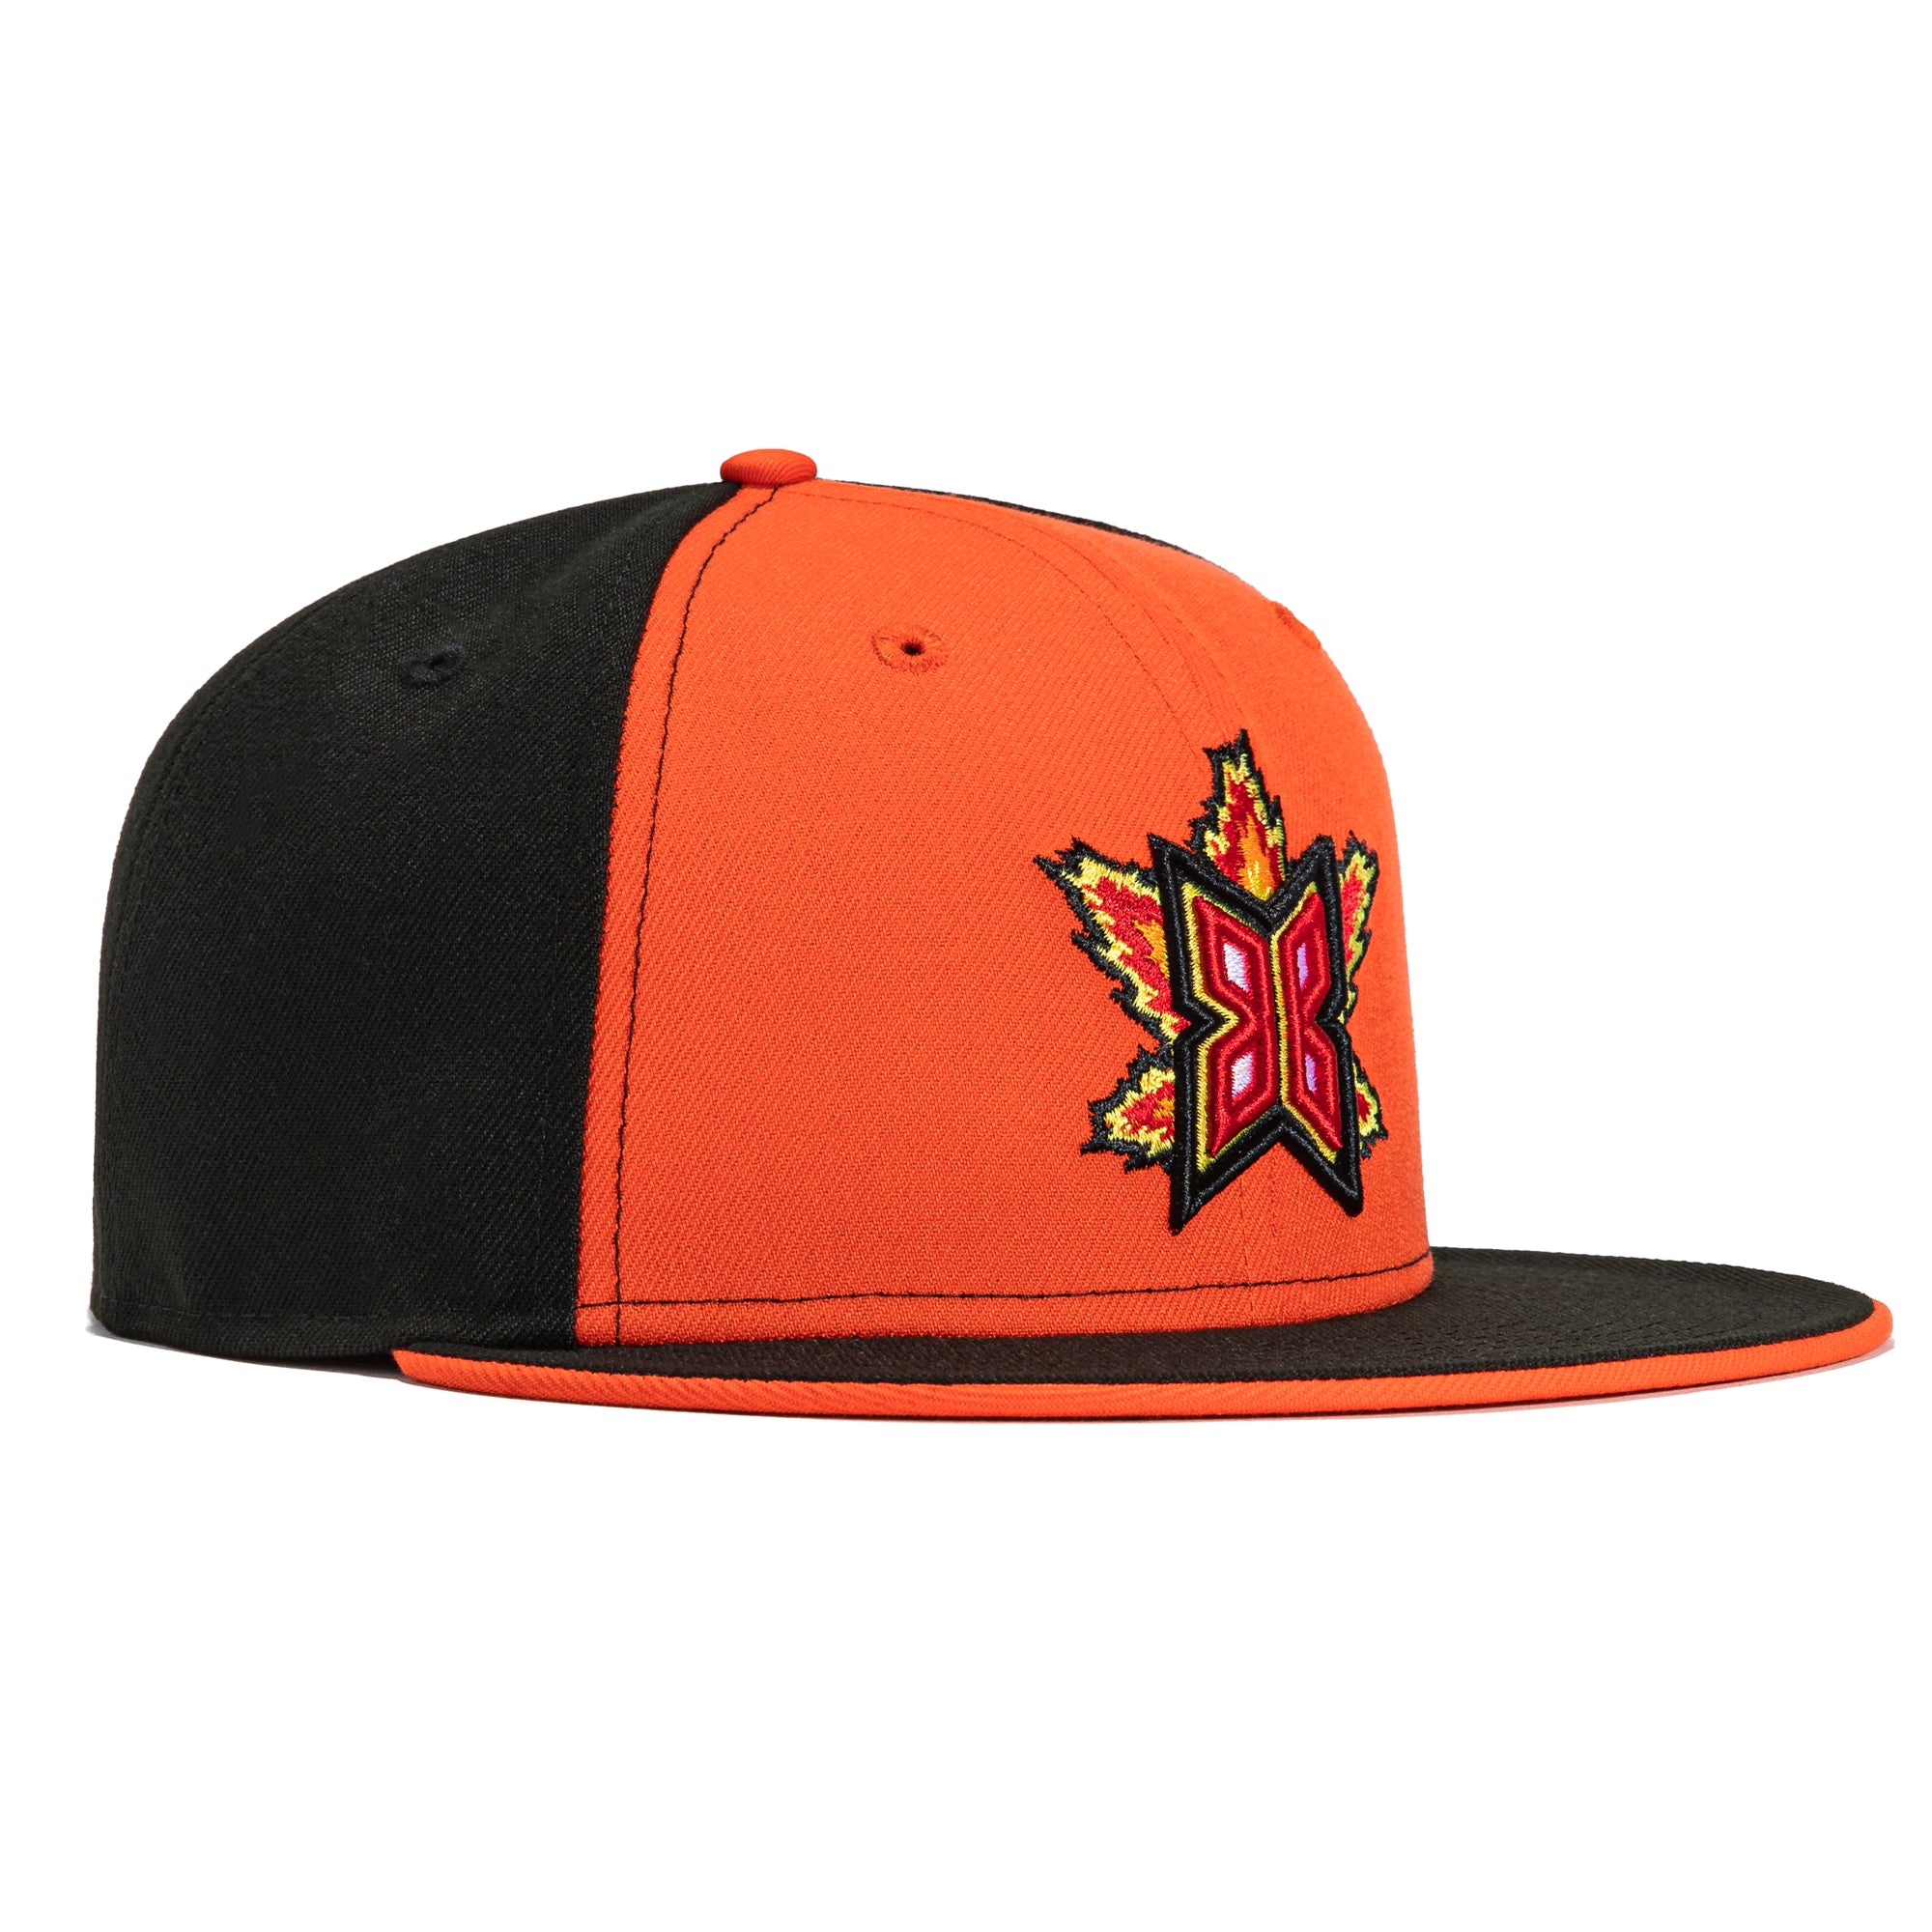 Baltimore Orioles New Era Road Authentic Collection On-Field 59FIFTY Fitted Hat - Black/Orange, Size: 7 1/4